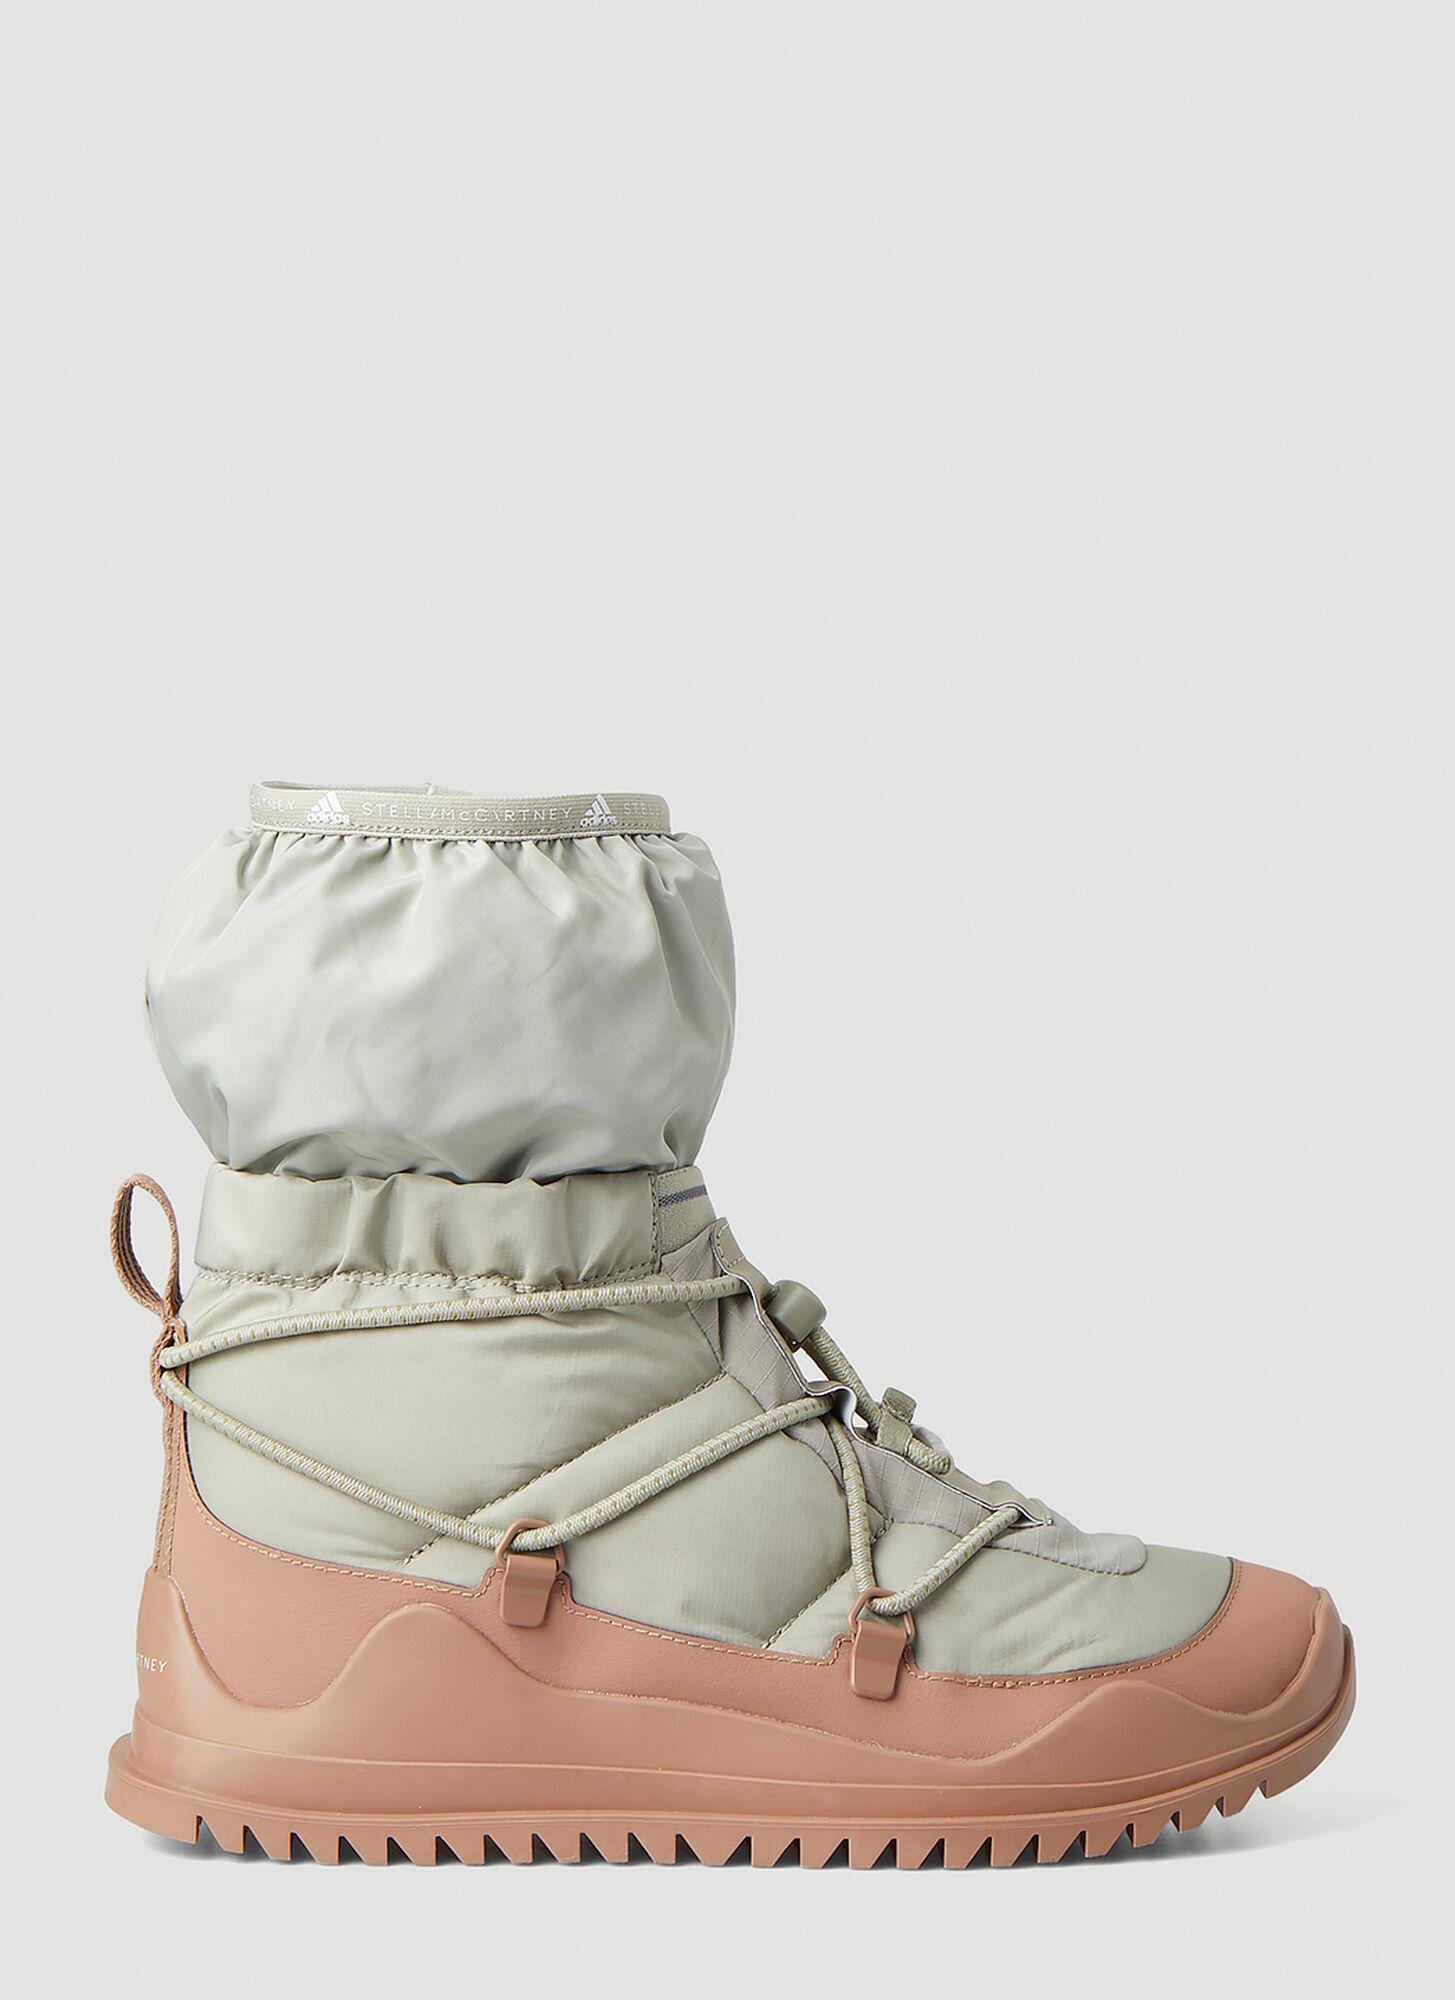 adidas By Stella McCartney Track Sole Winter Boots in Natural | Lyst